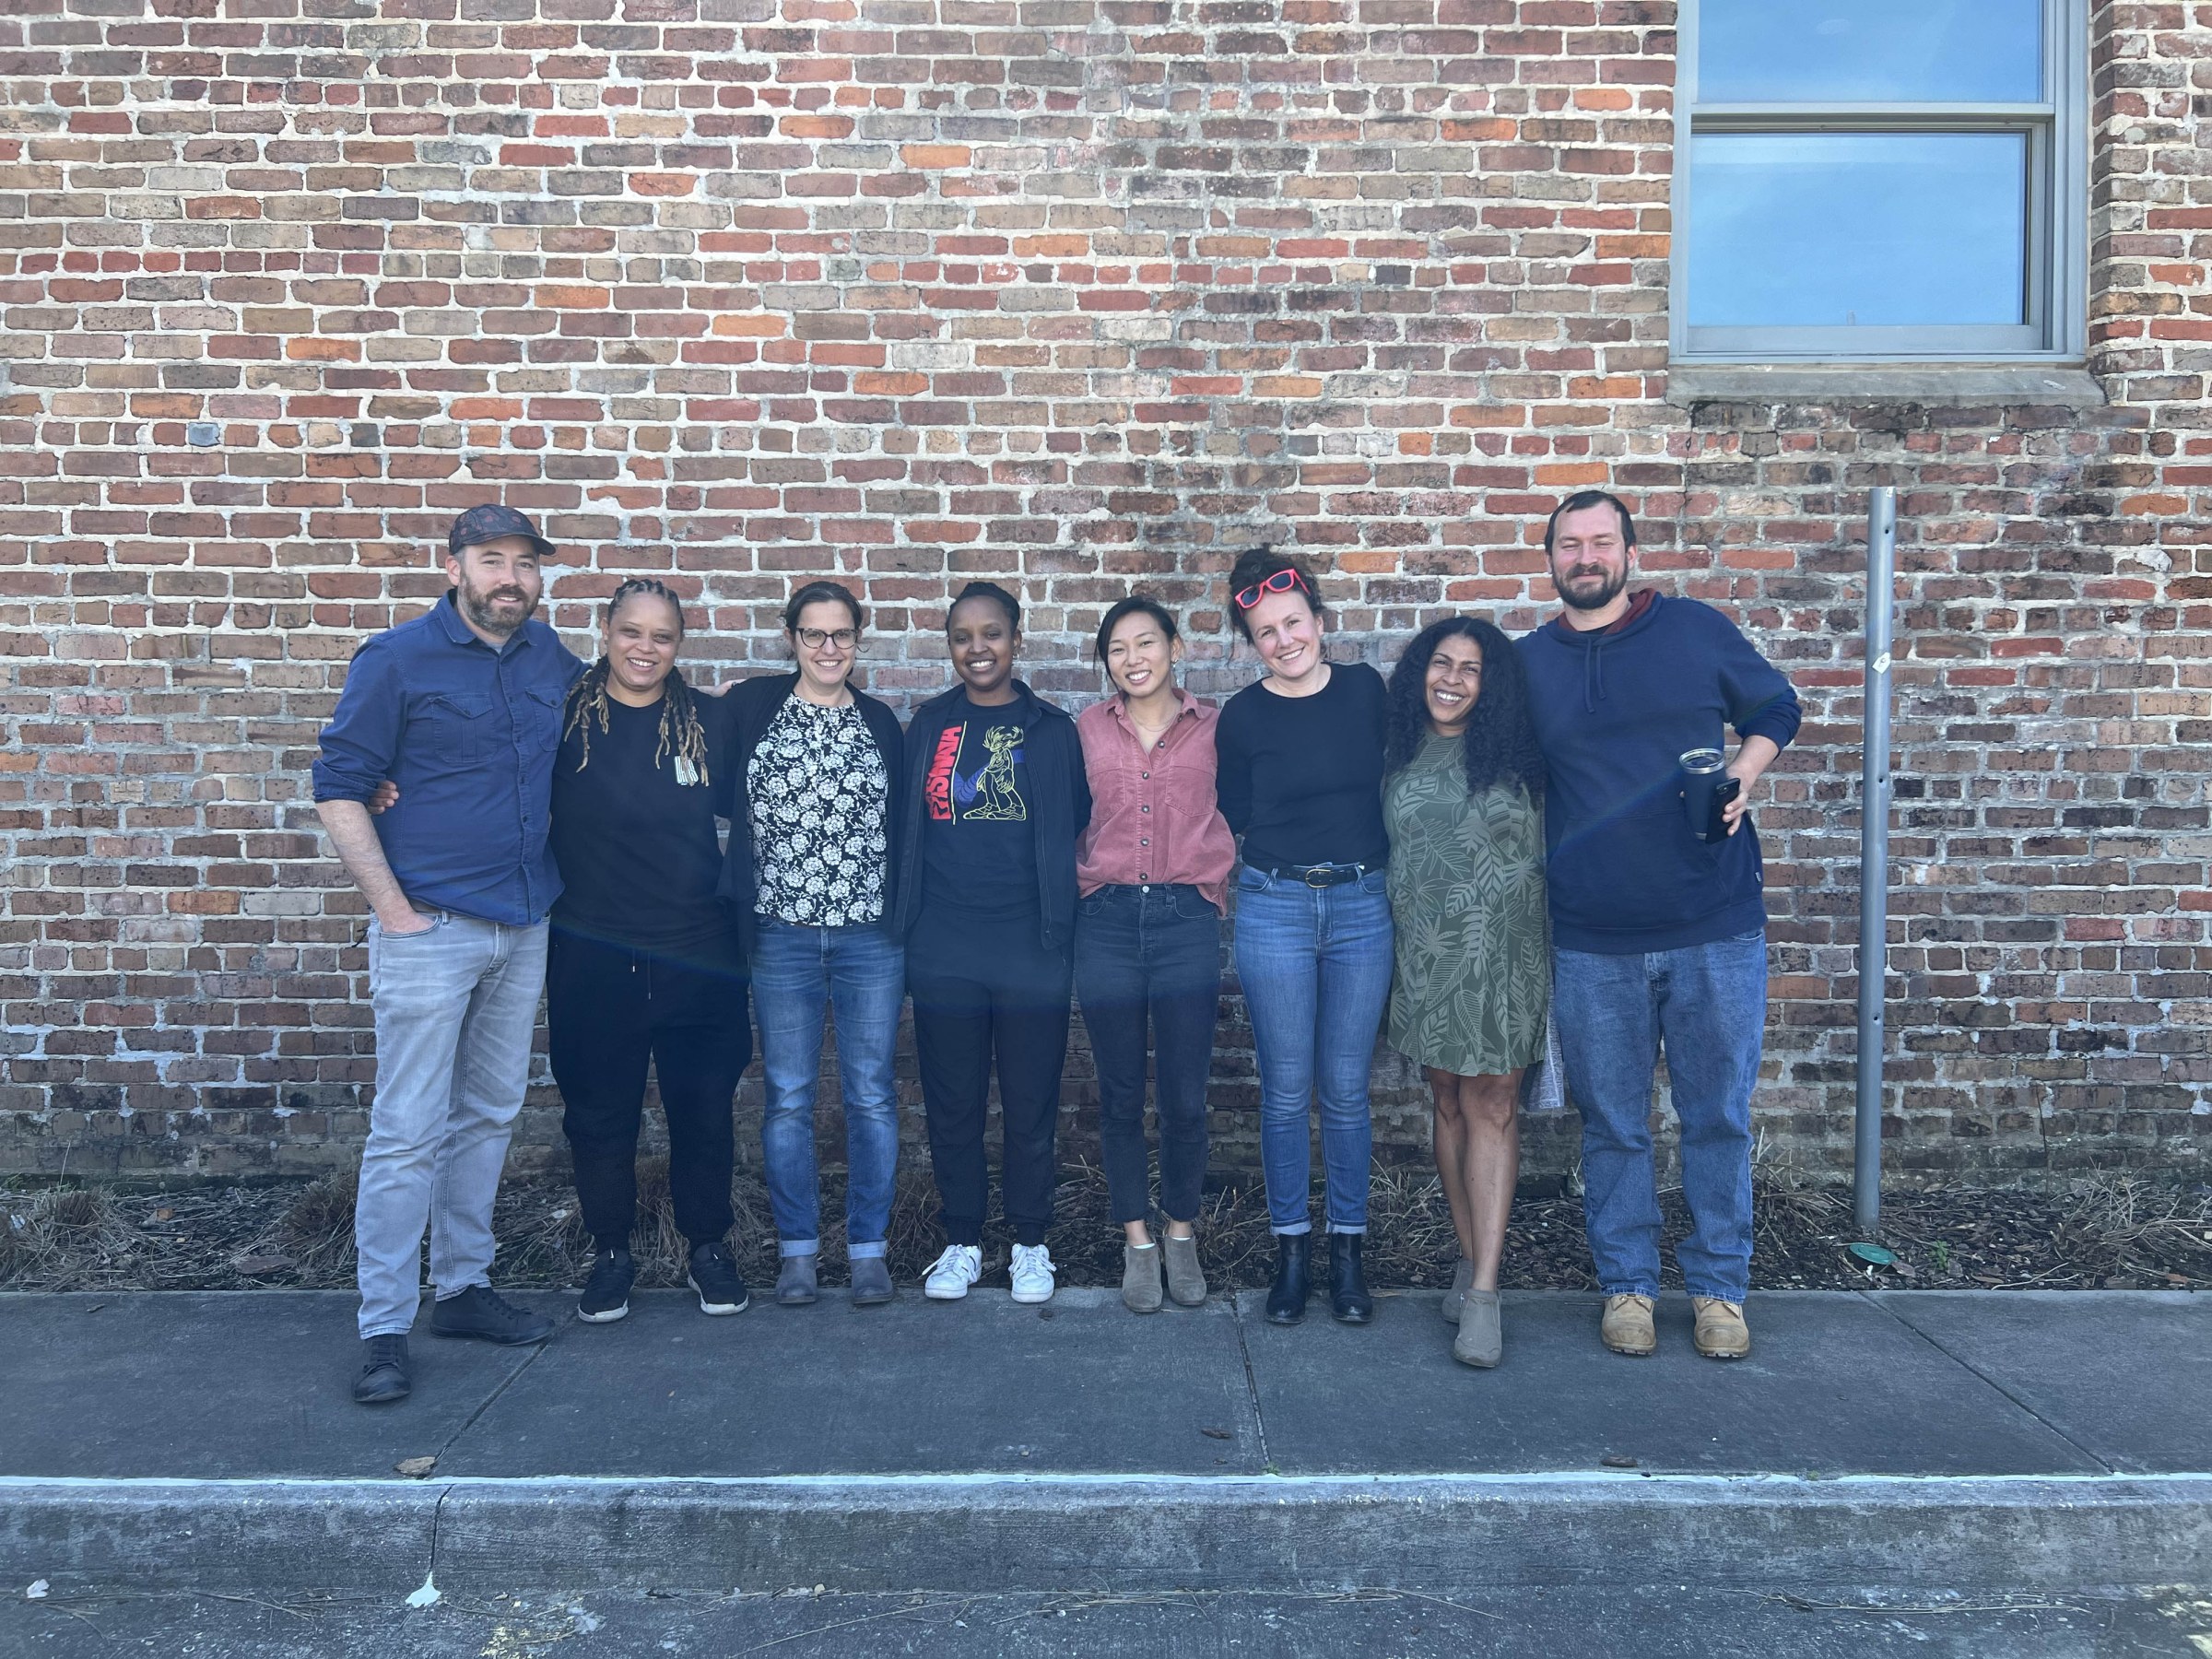 The Plot of Land team of eight people stand for a group photo, arms around each others shoulders, standing in front of a brick background.